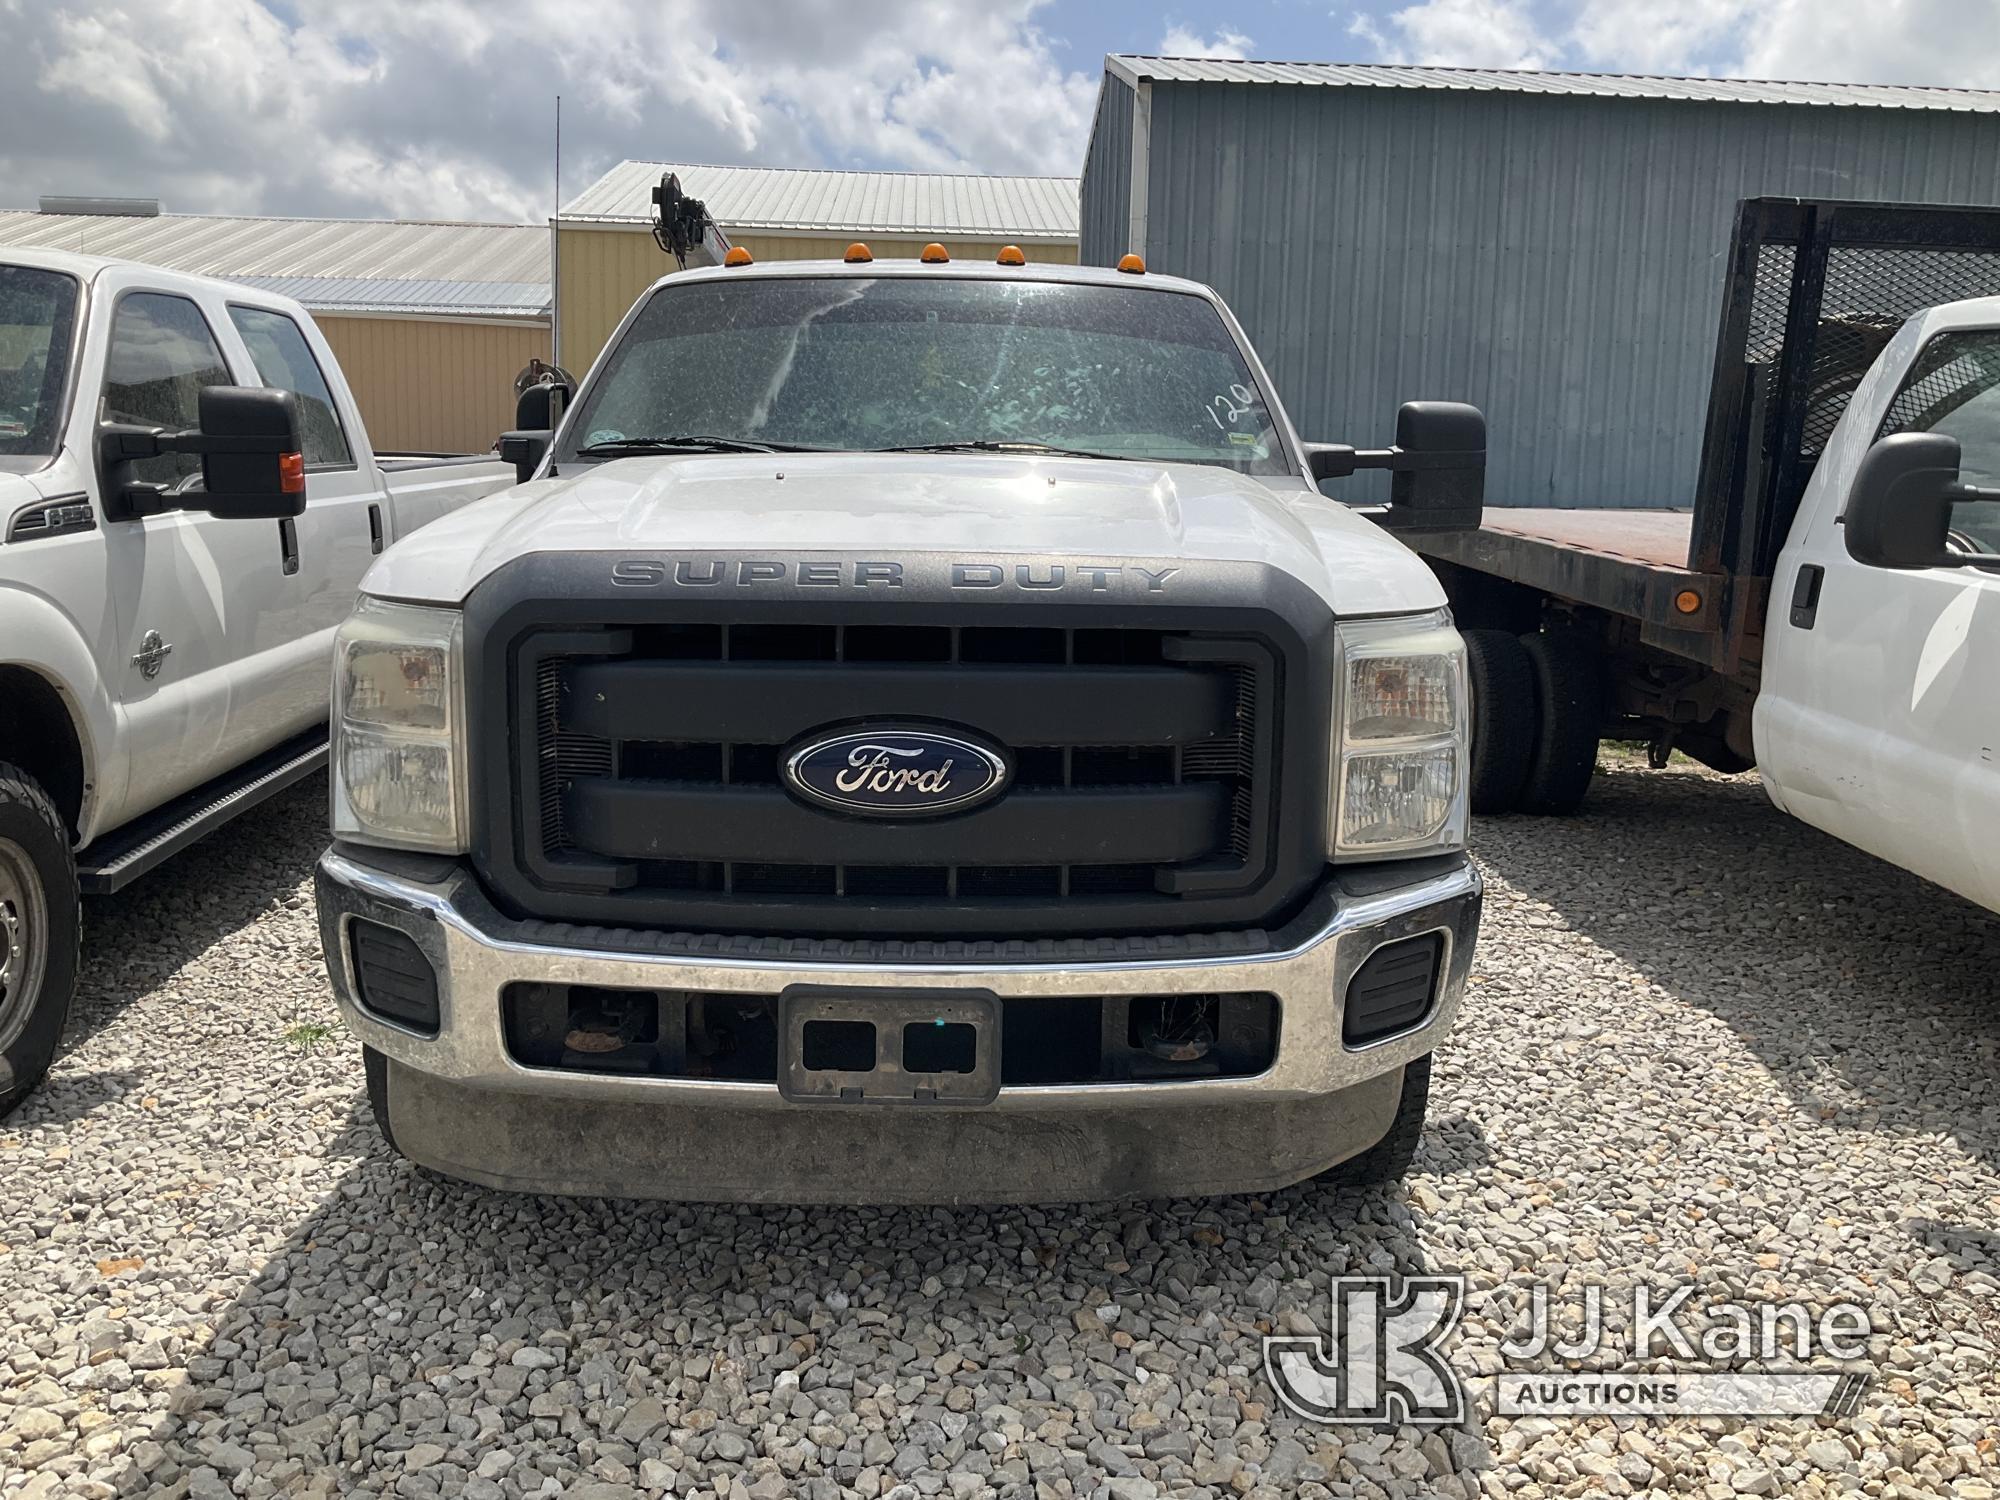 (Tipton, MO) 2013 Ford F350 4x4 Extended-Cab Service Truck Jump to Start, Runs, Moves. Dealer Only,